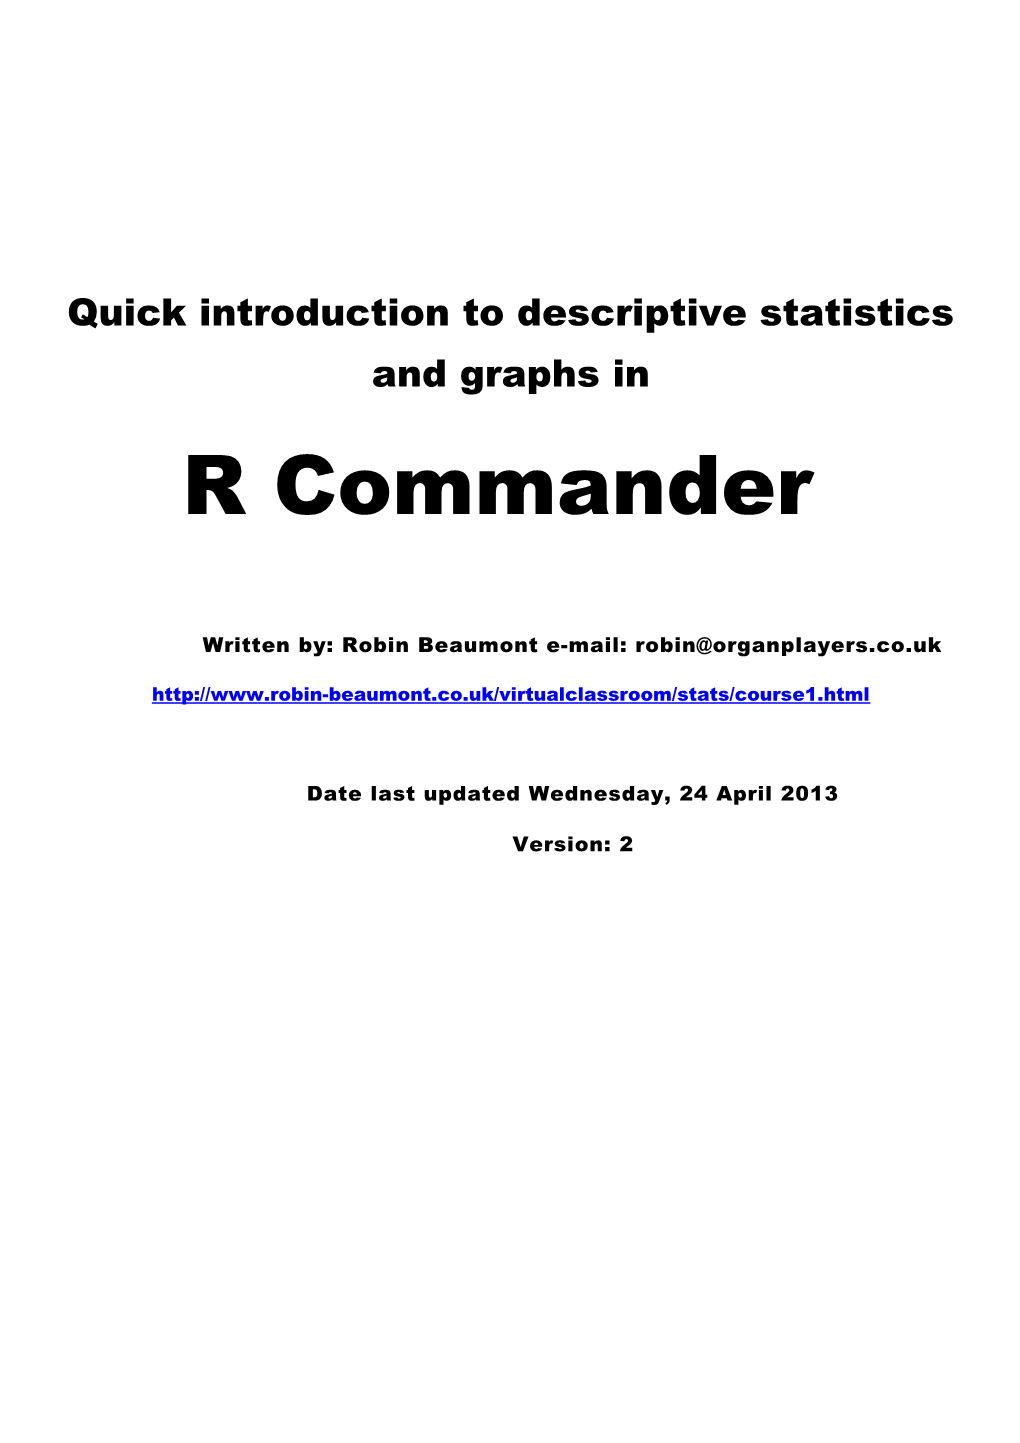 Quick Introduction to Descriptive Statistics and Graphs In